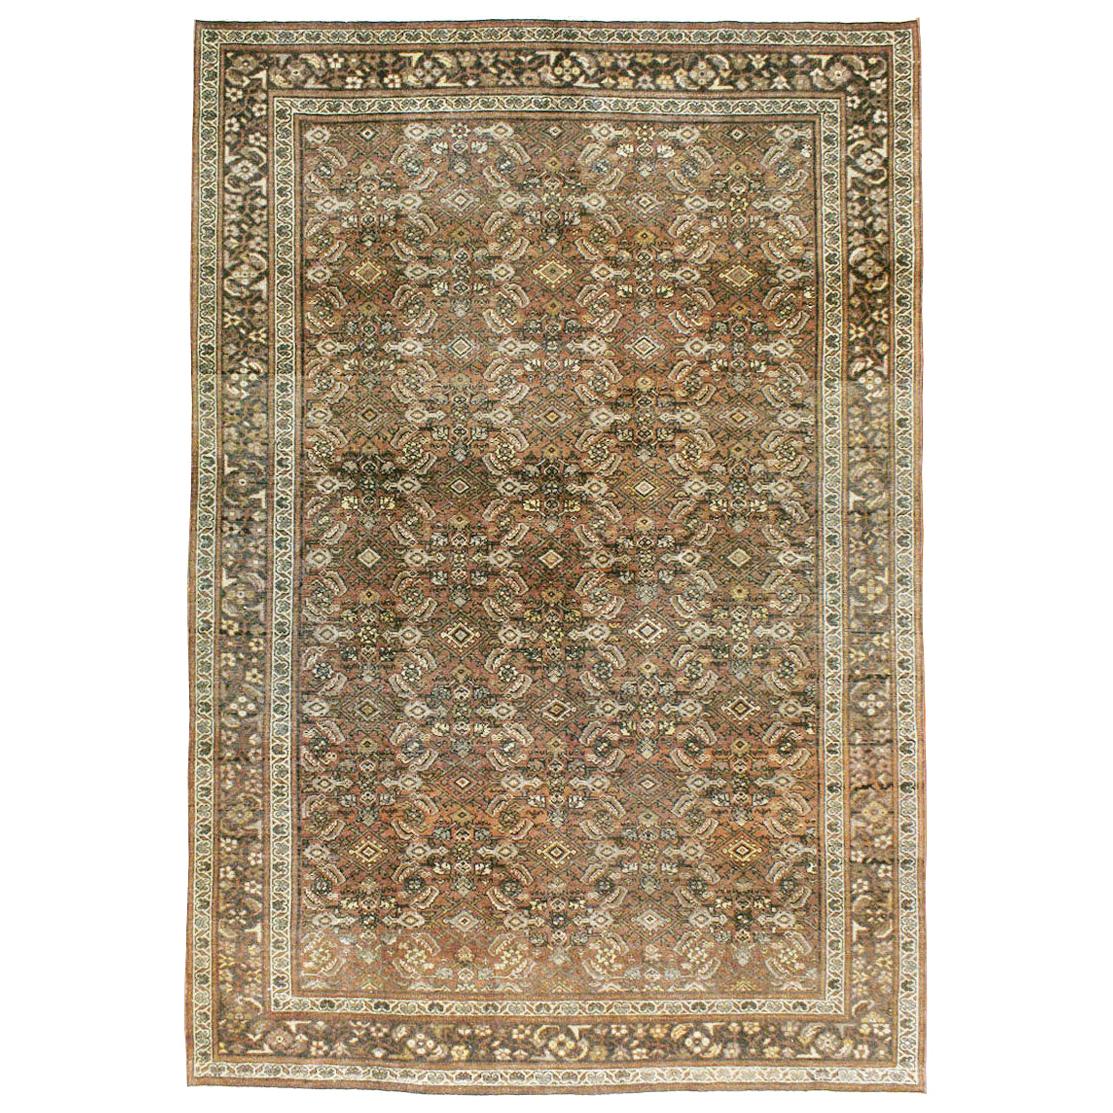 Early 20th Century Rustic Persian Handmade Accent Carpet in Shades of Brown